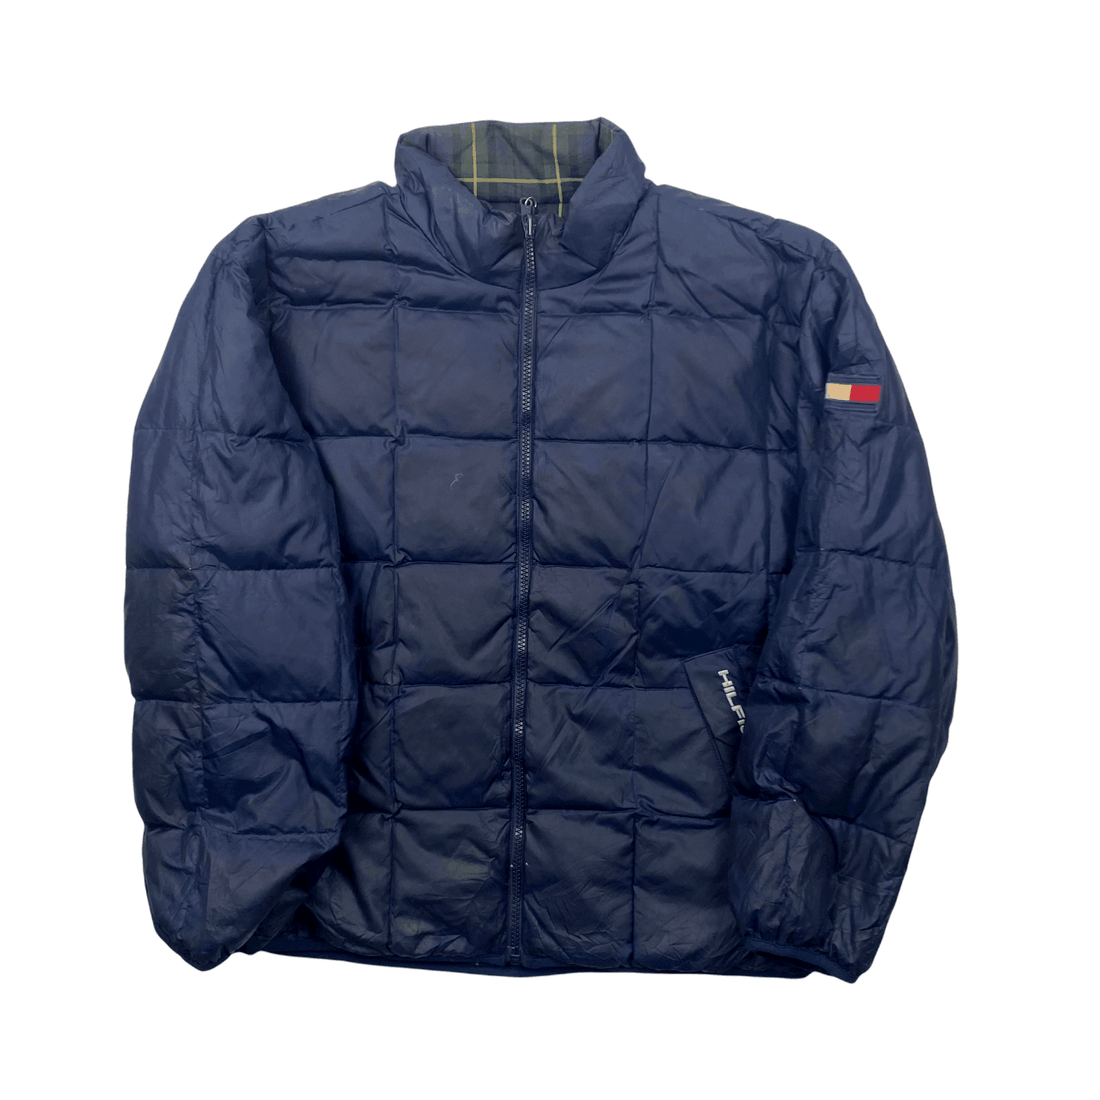 Vintage Navy Blue Reversible Tommy Hilfiger Spell-Out Puffer Coat/ Jacket - Extra Large - The Streetwear Studio